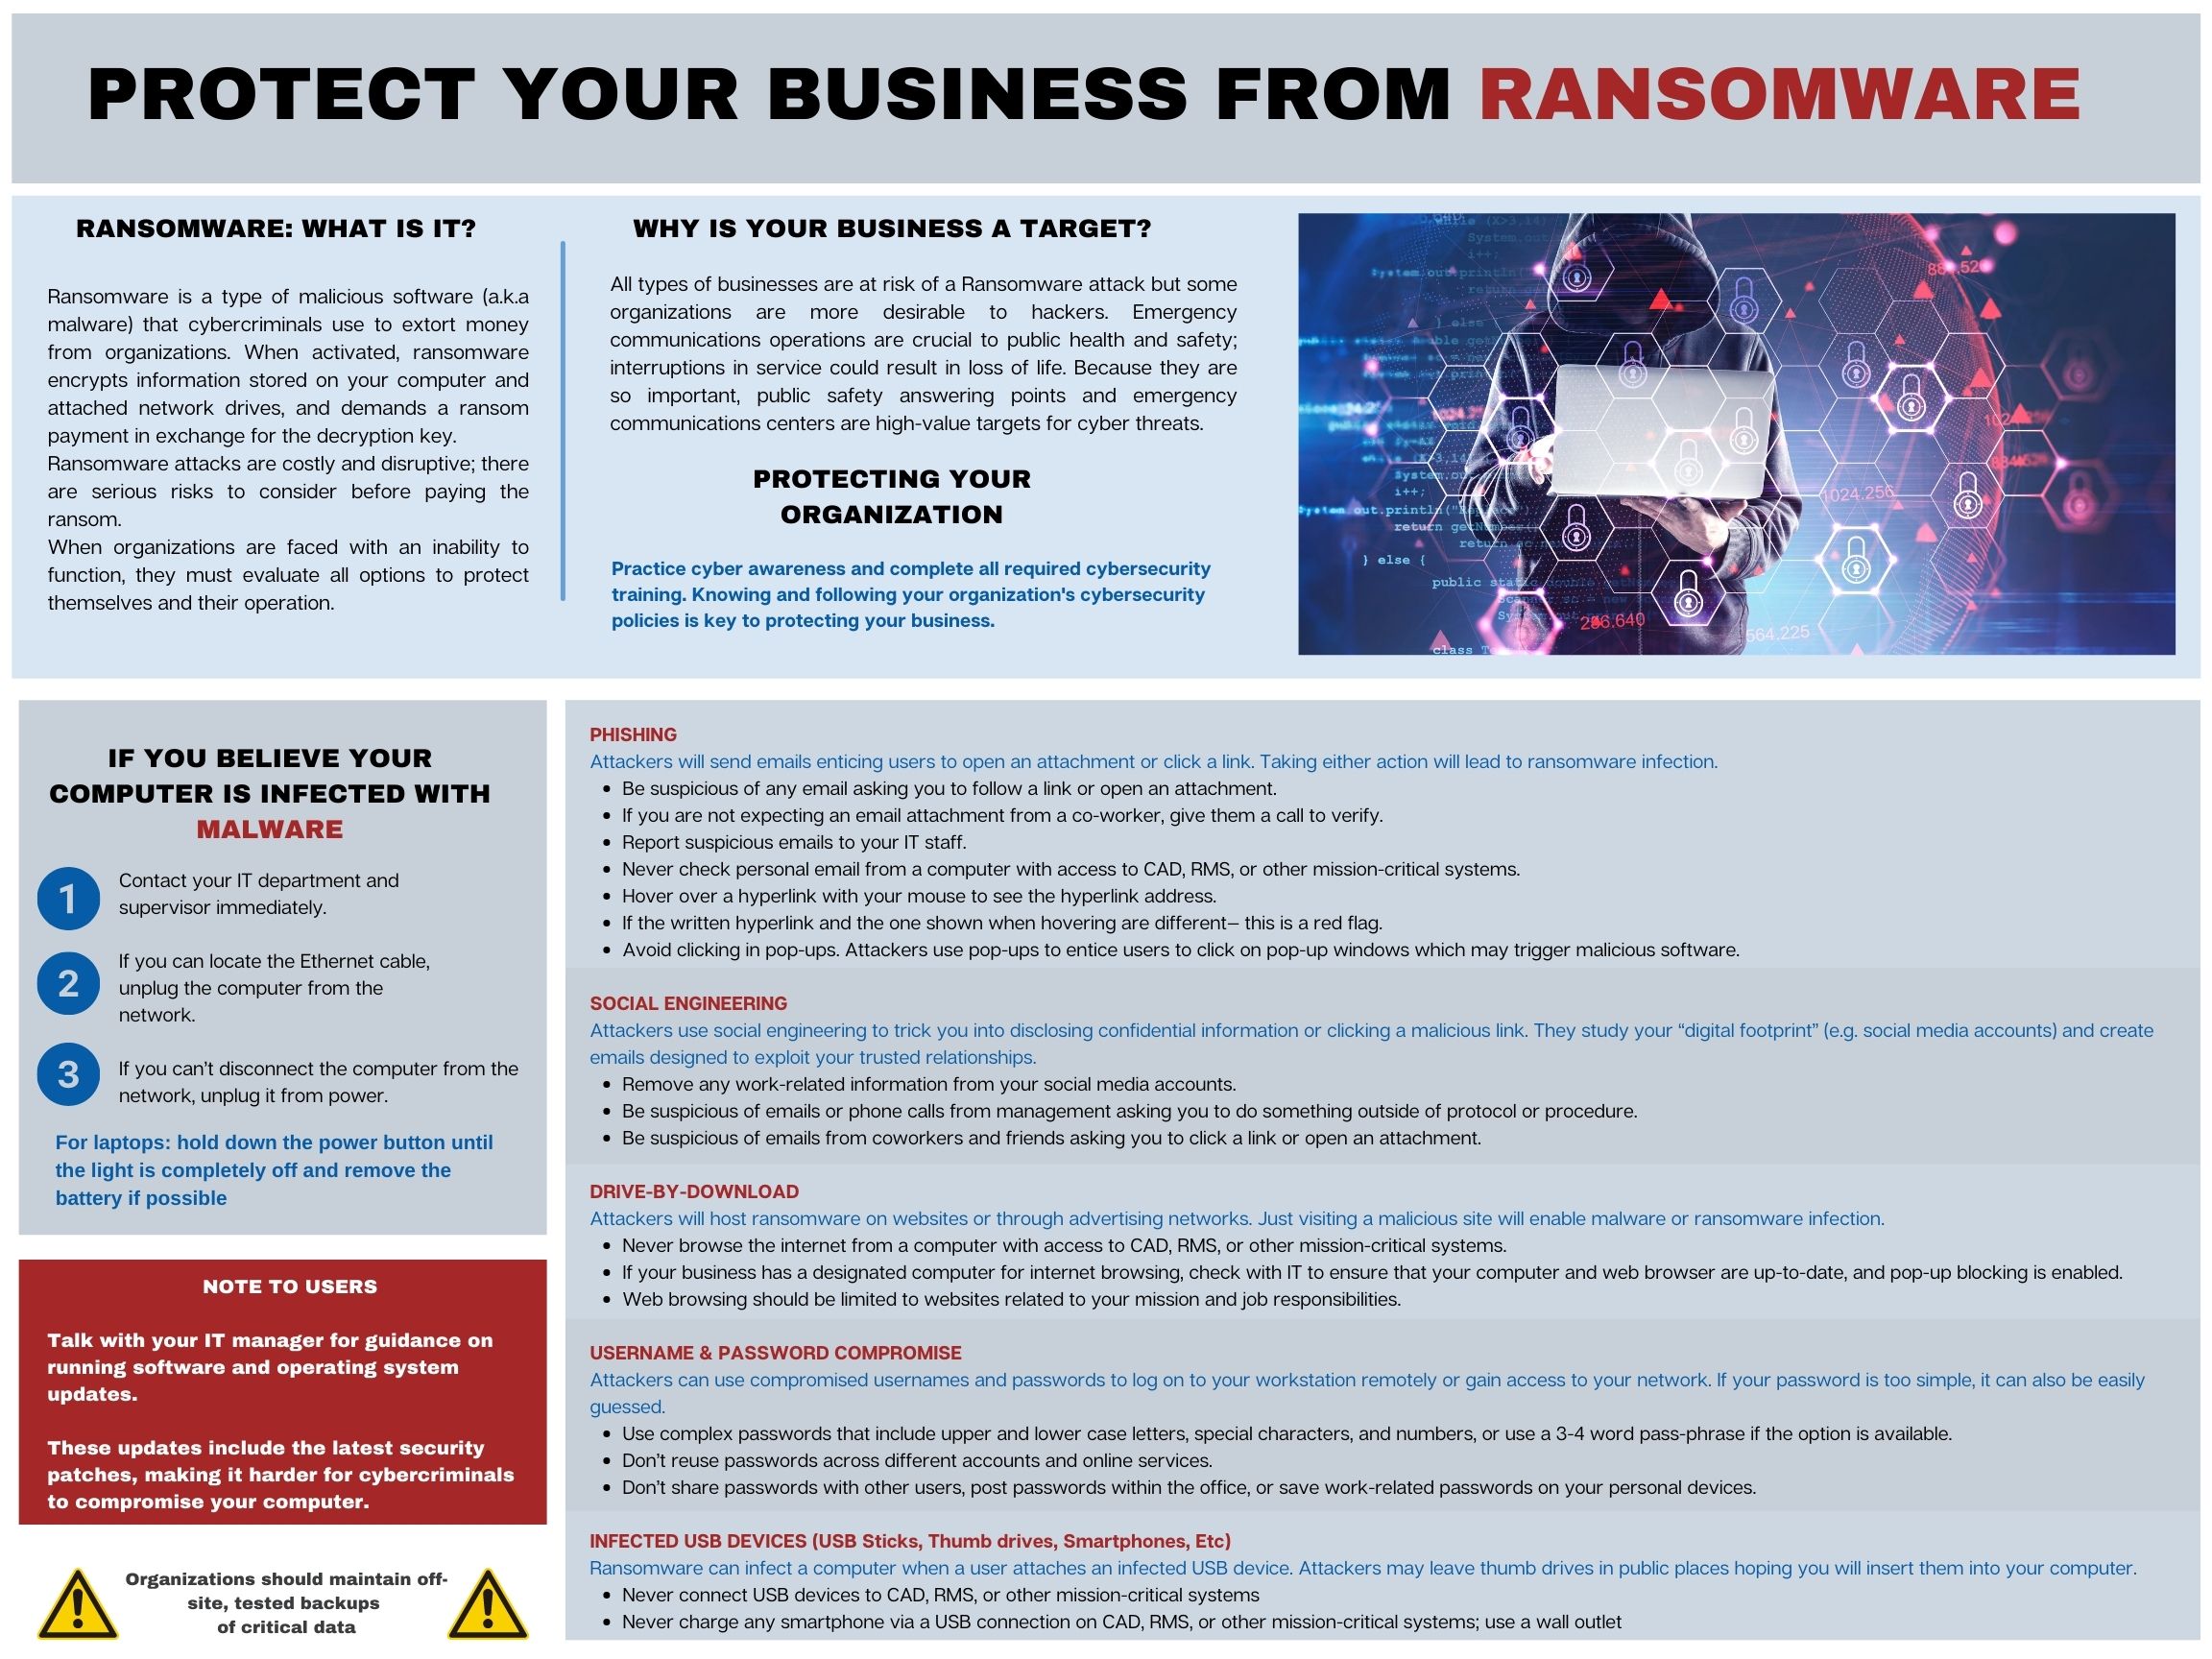 Protect your business from ransomware